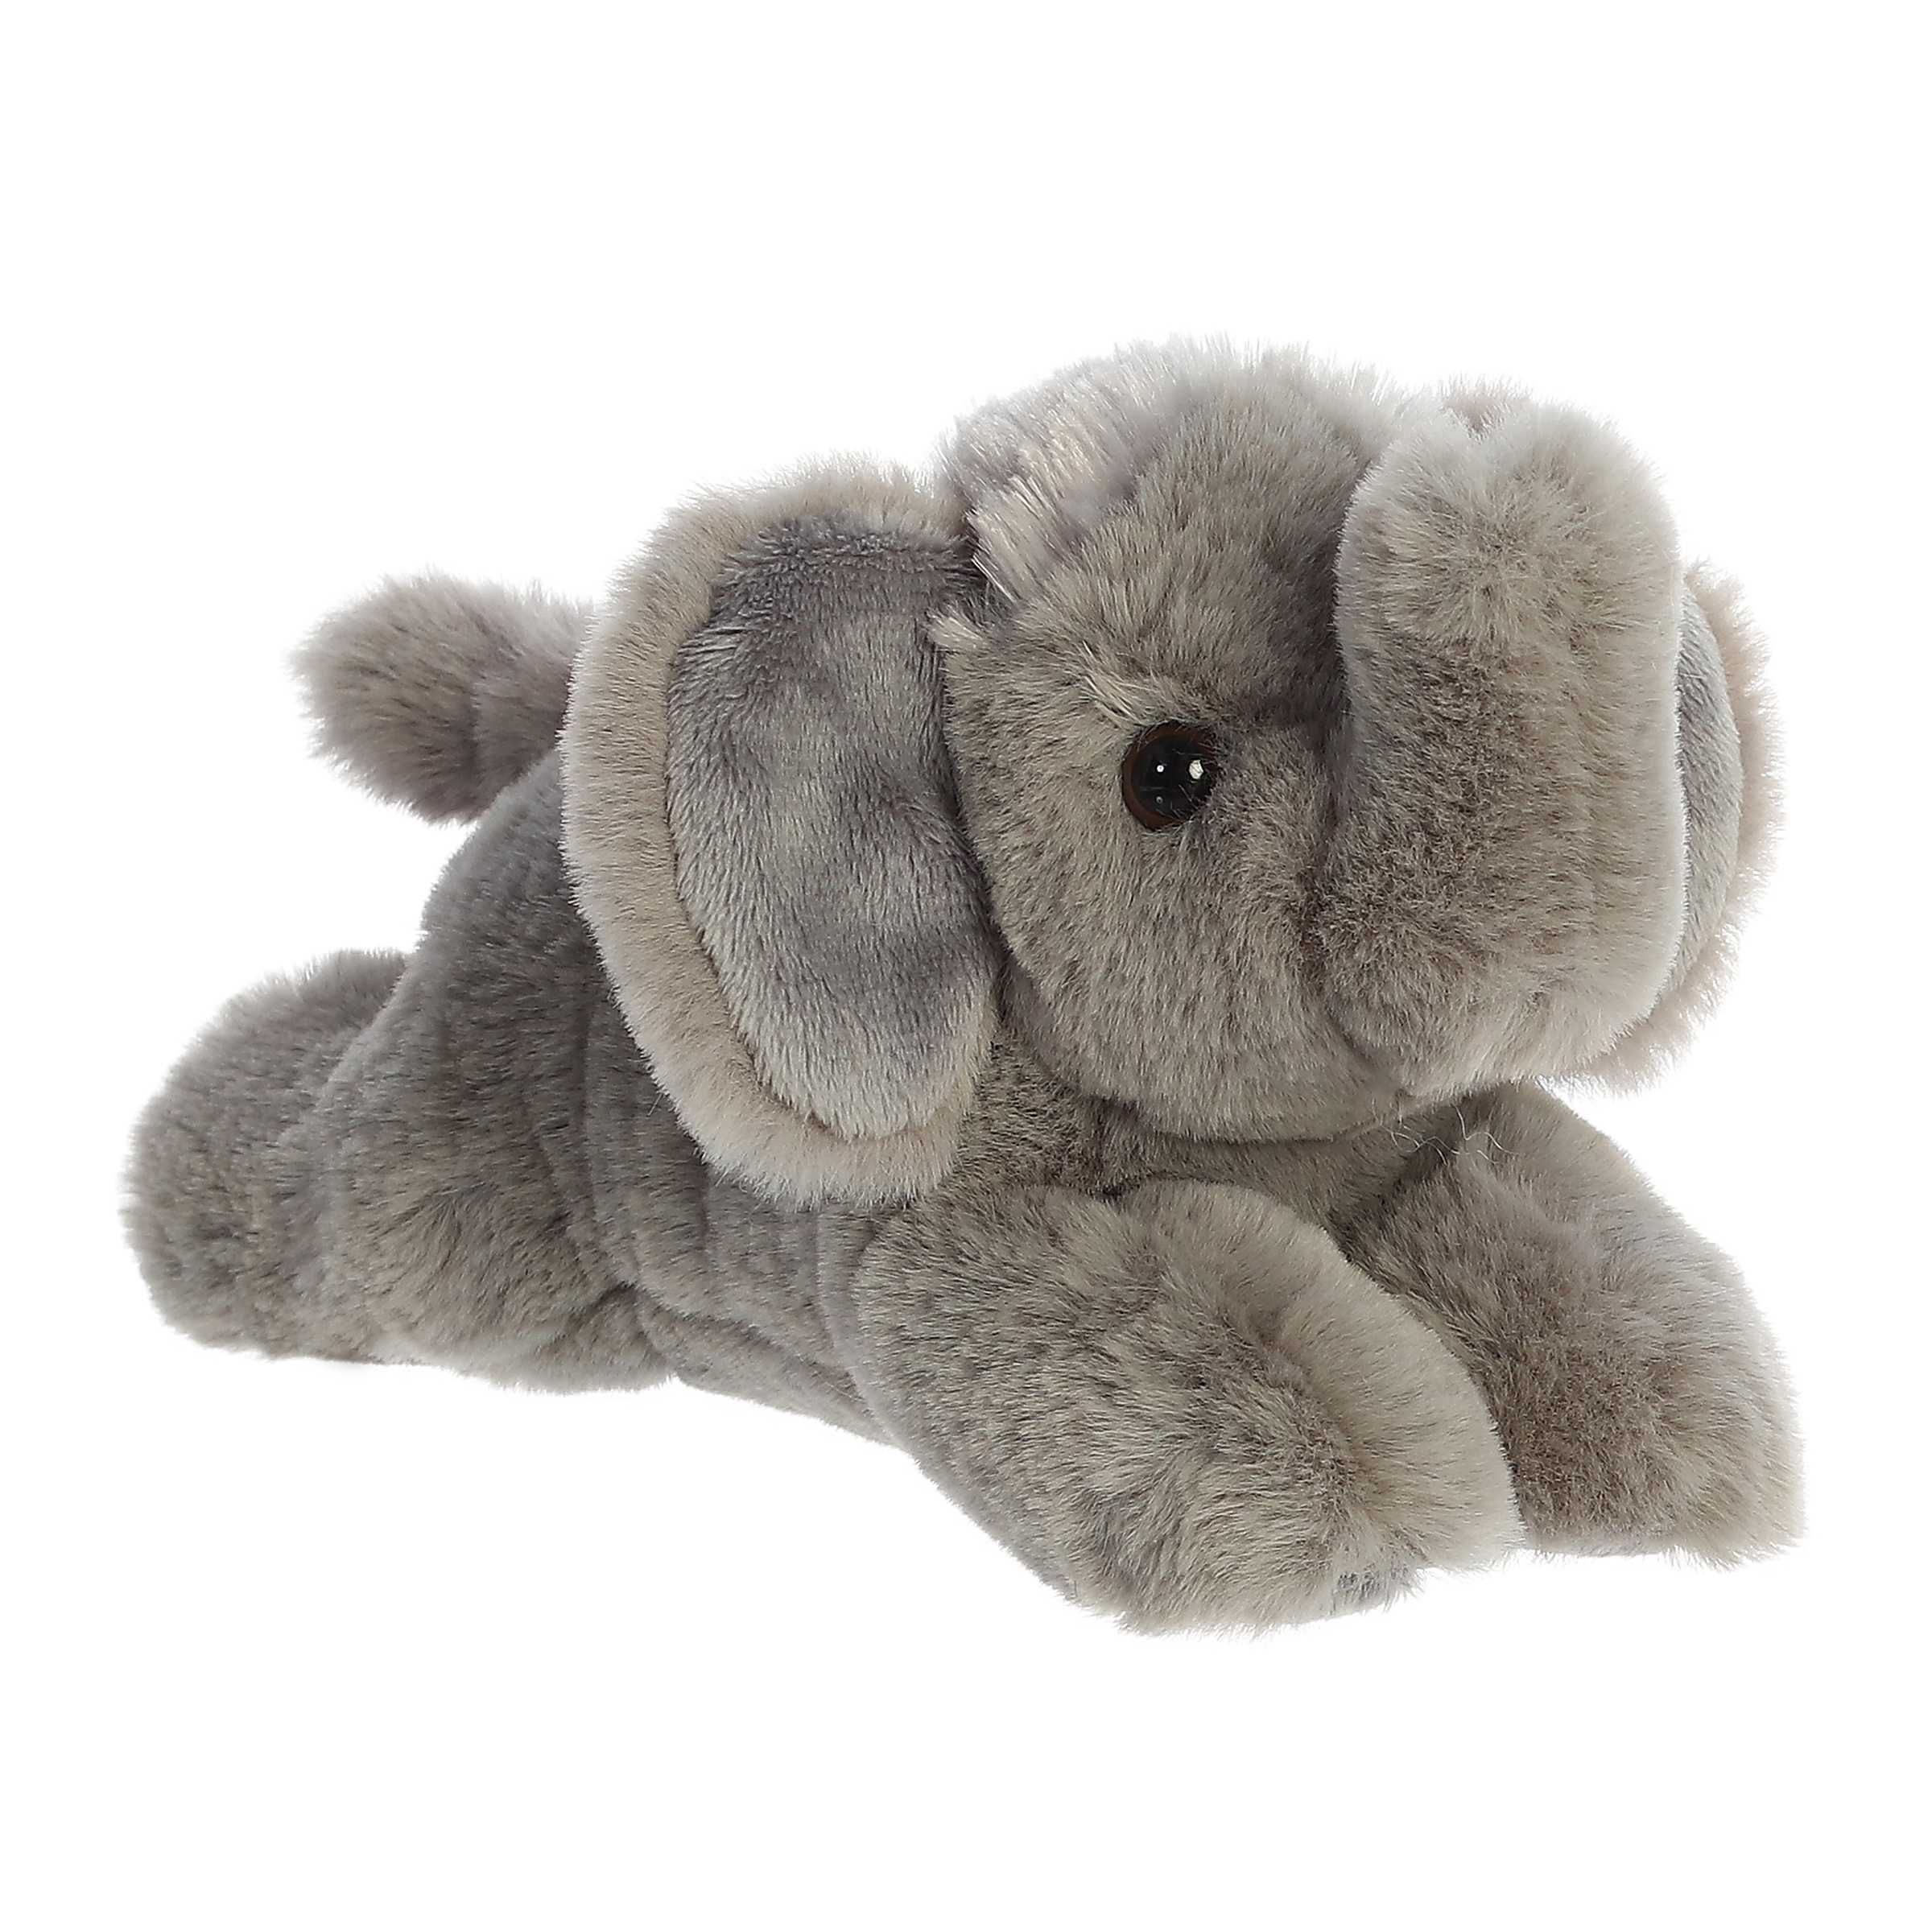 Soft grey baby elephant plush with realistic details, sweet expression, and floppy ears, from the Mini Flopsies collection.